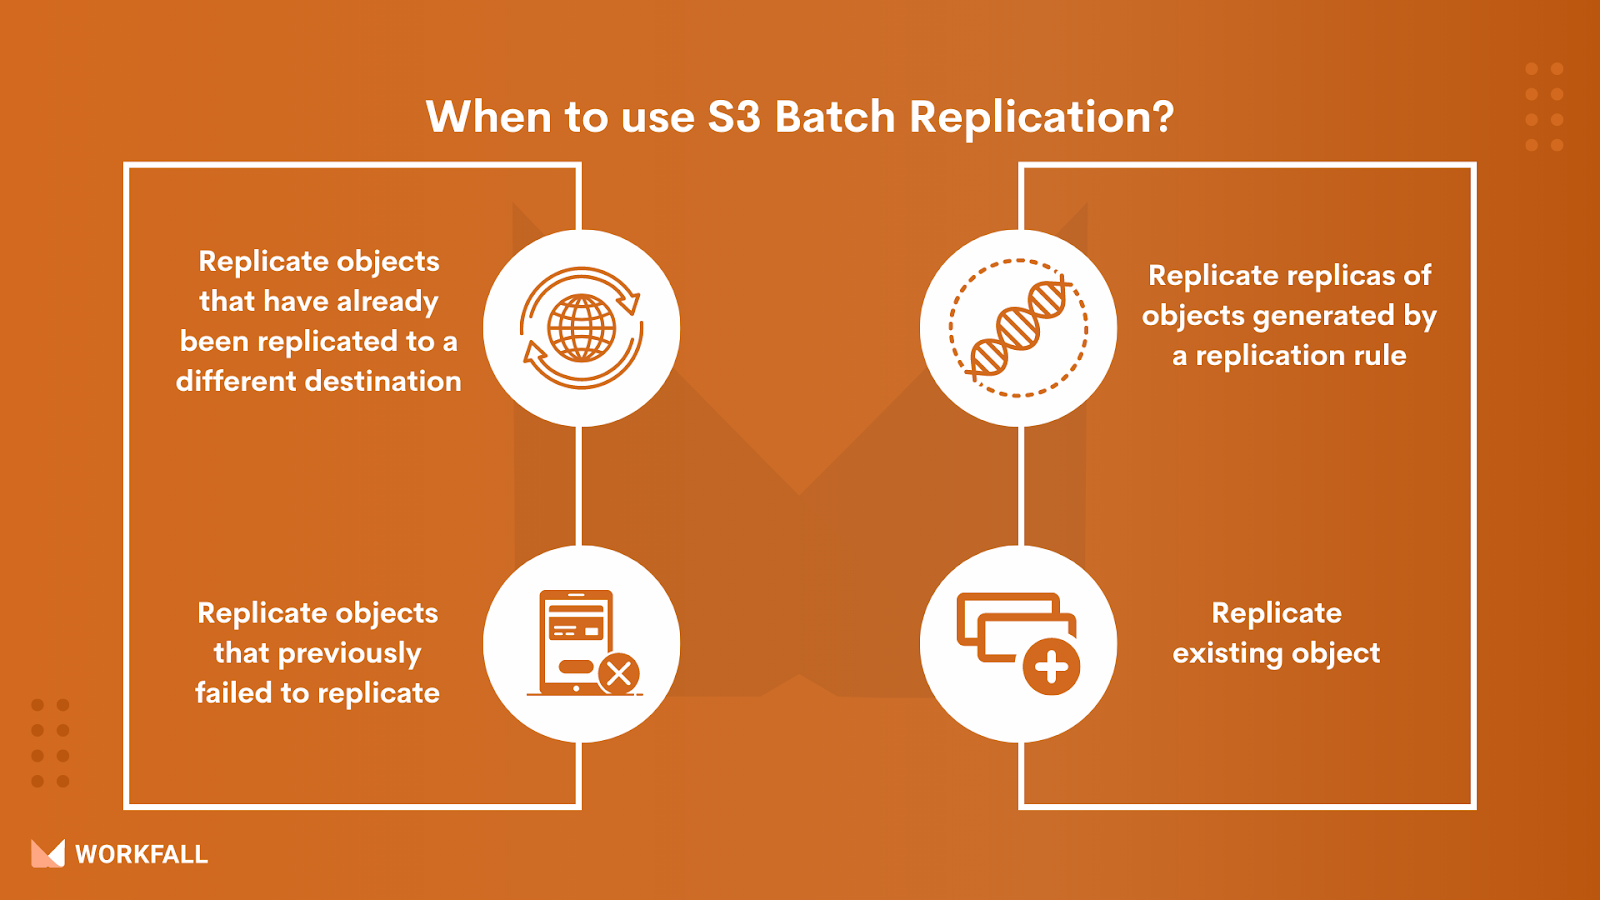 When to use S3 Batch Replication?